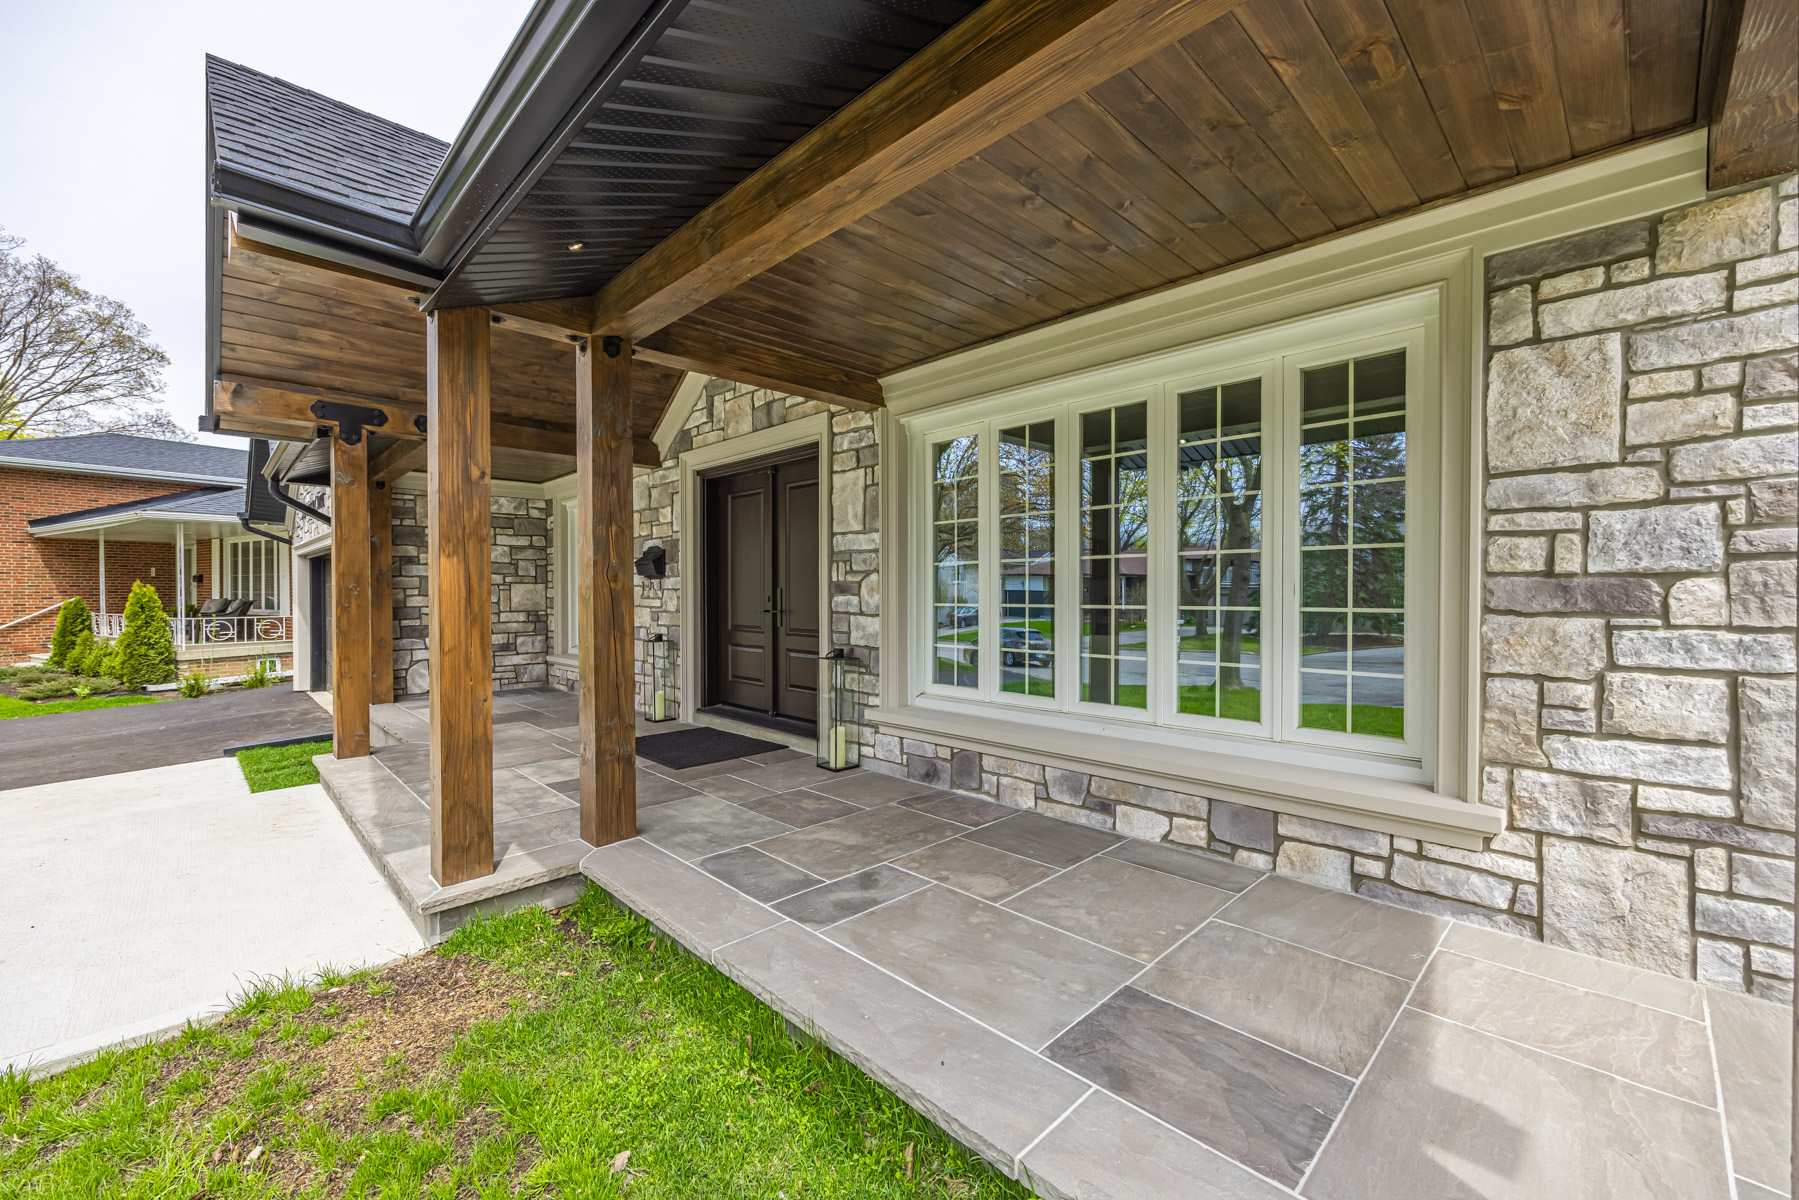 House with wood panels in ceiling, Douglas fir posts and stone patio – 3 Logwood Court.